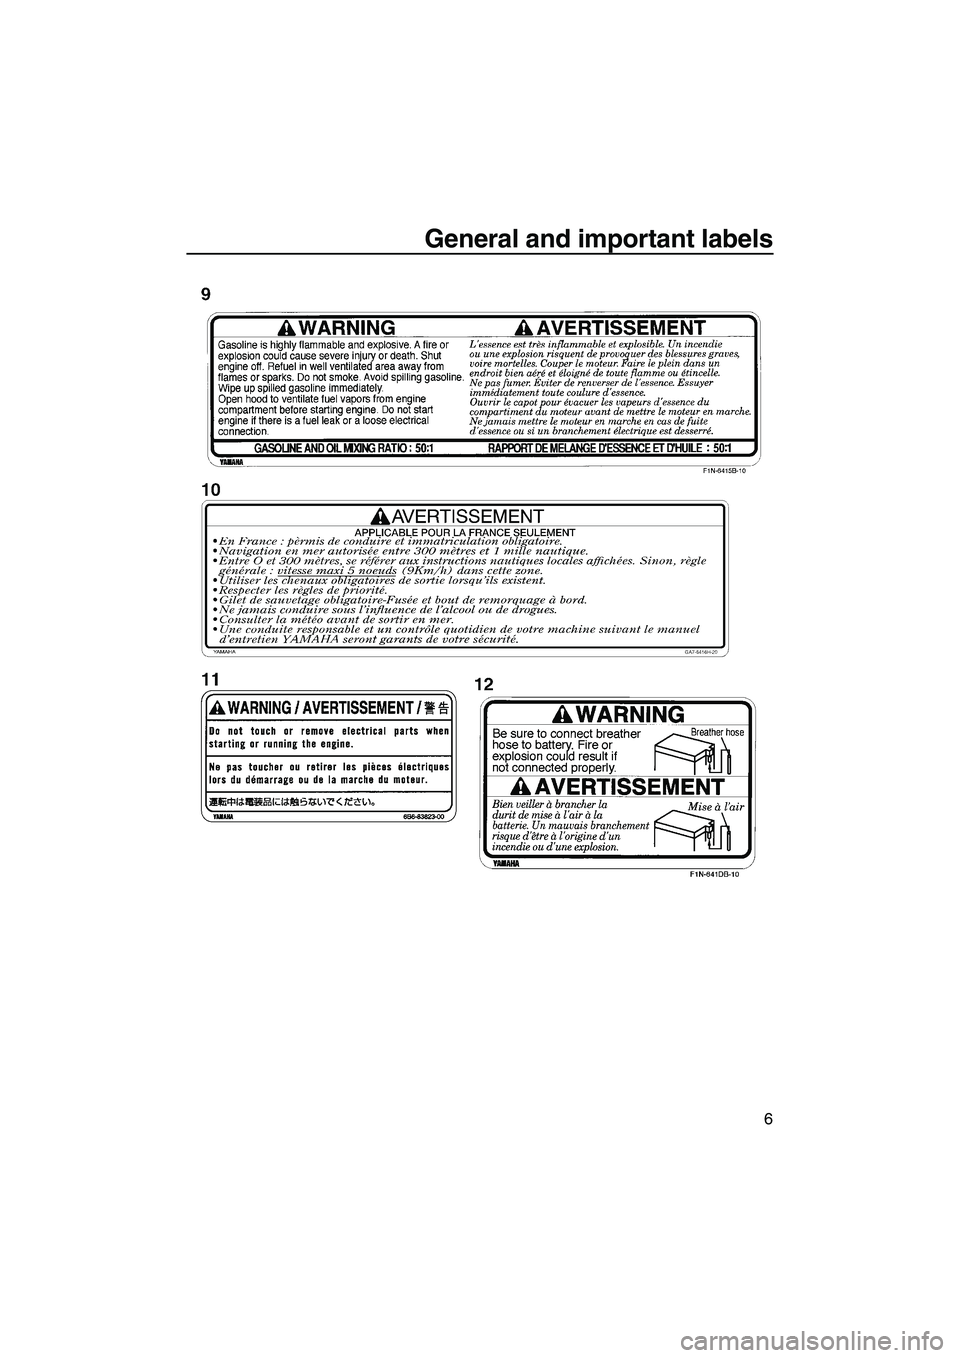 YAMAHA SUPERJET 2007 User Guide General and important labels
6
UF1N75E0.book  Page 6  Tuesday, May 16, 2006  9:53 AM 